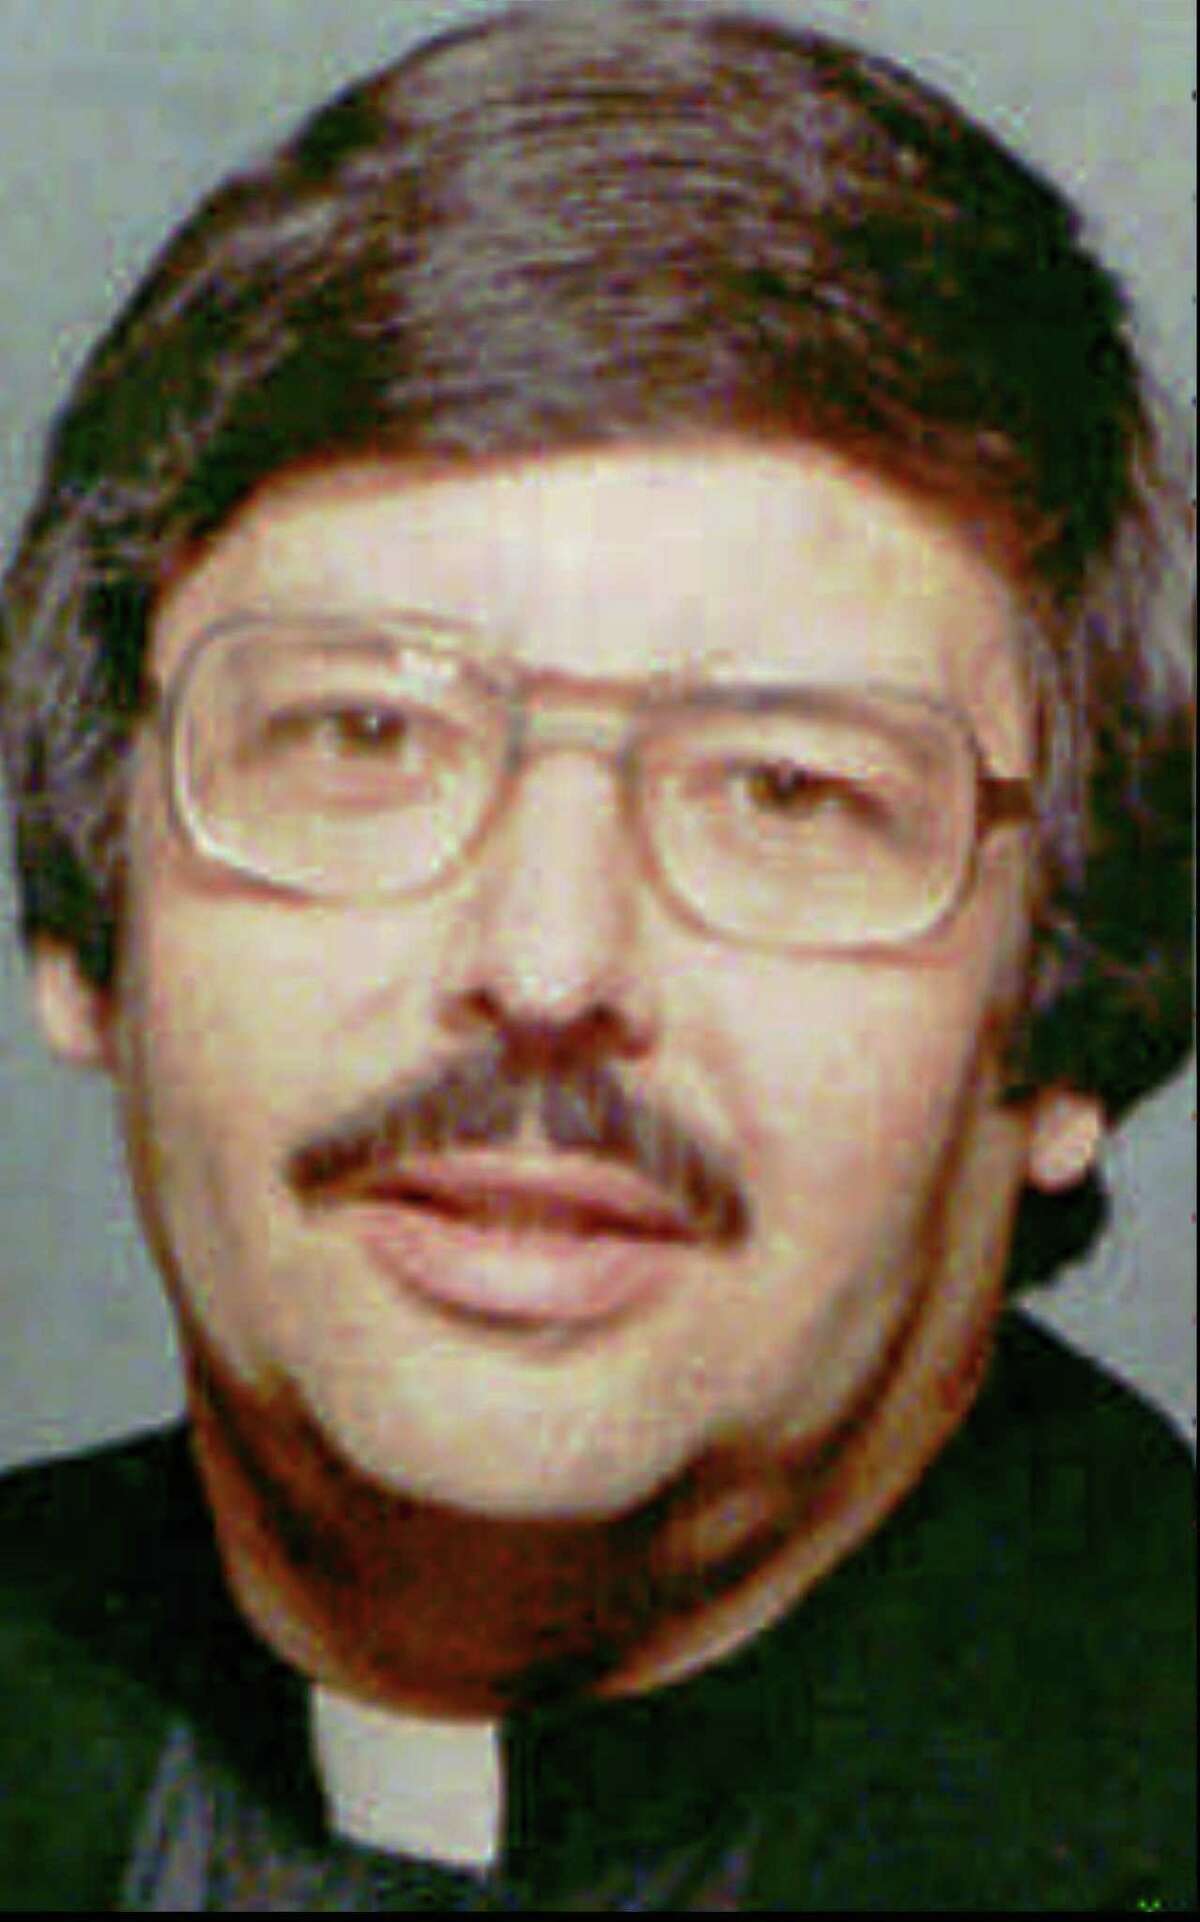 An undated file photo of the Rev. Raymond Pcolka whose last assignment was as pastor of the Sacred Heart parish in the Byram section of Greenwhich, Conn. In January 1993, 15 men and women filed civil lawsuits accusing Pcolka of sexually assaulting them when they were youngsters while he was an assistant pastor in Bridgeport and Stratford.